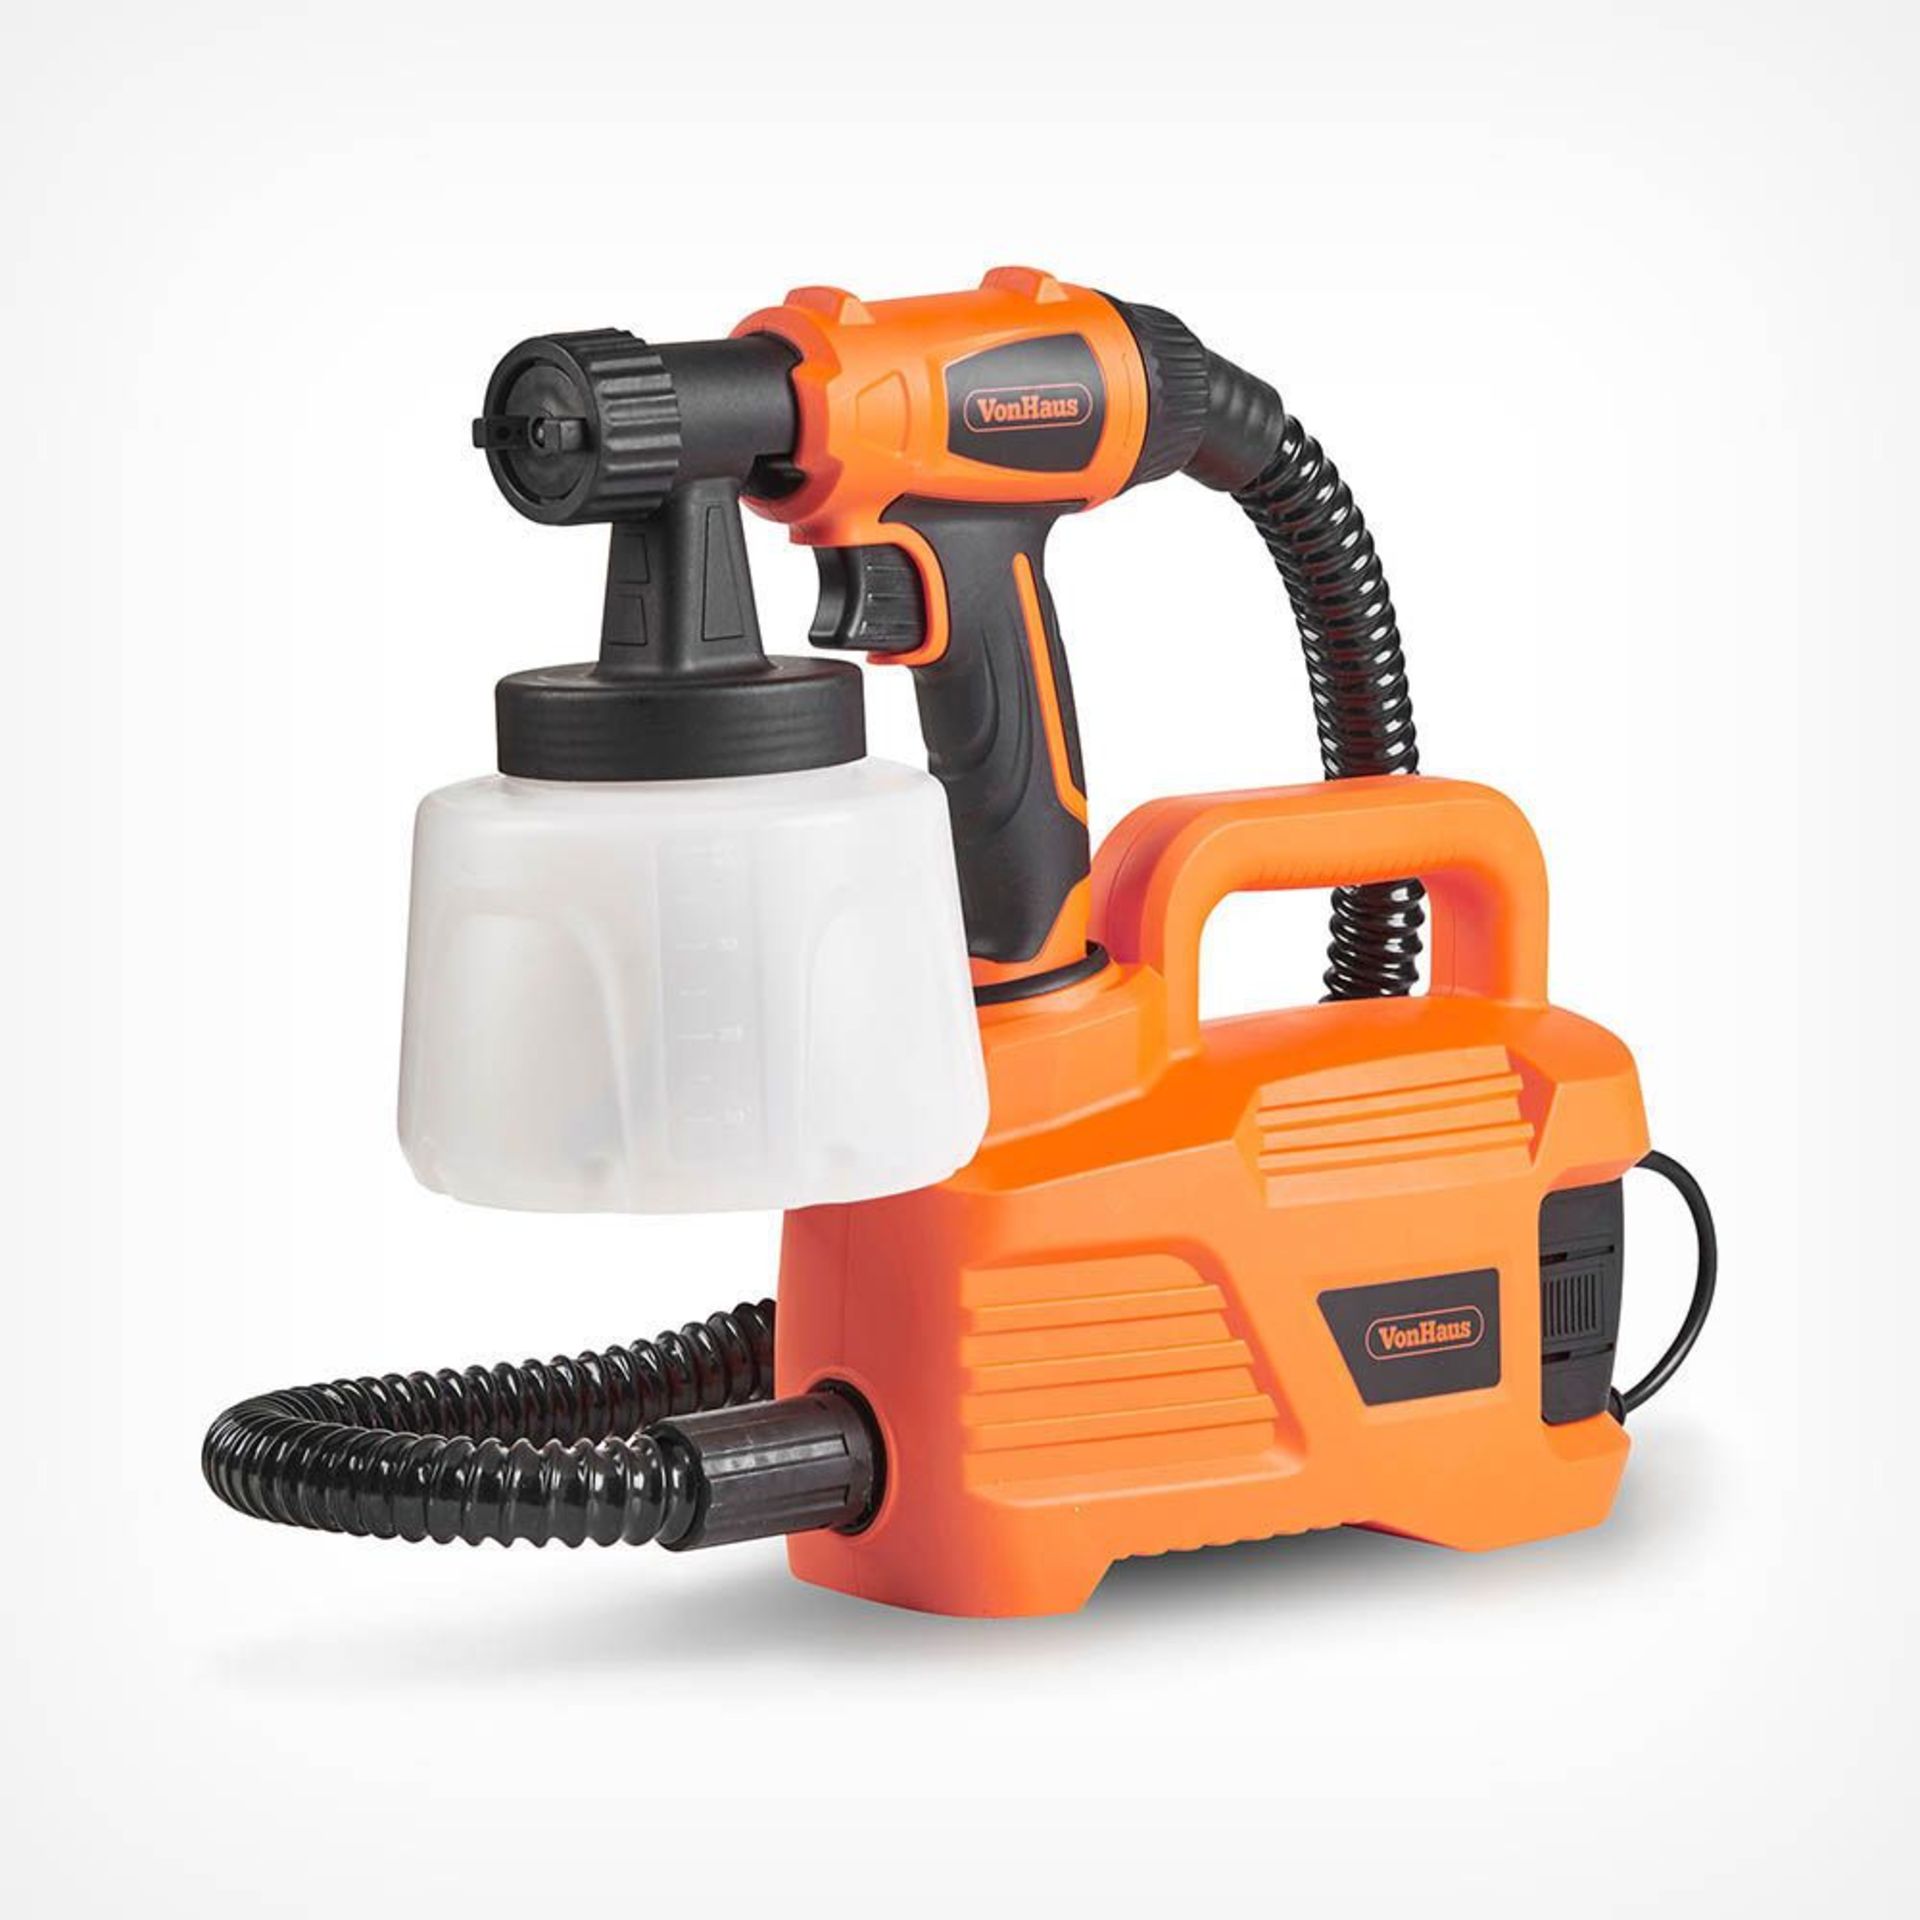 800W Paint Sprayer. Boasting a forceful 800W motor, the paint station delivers a strong continuous